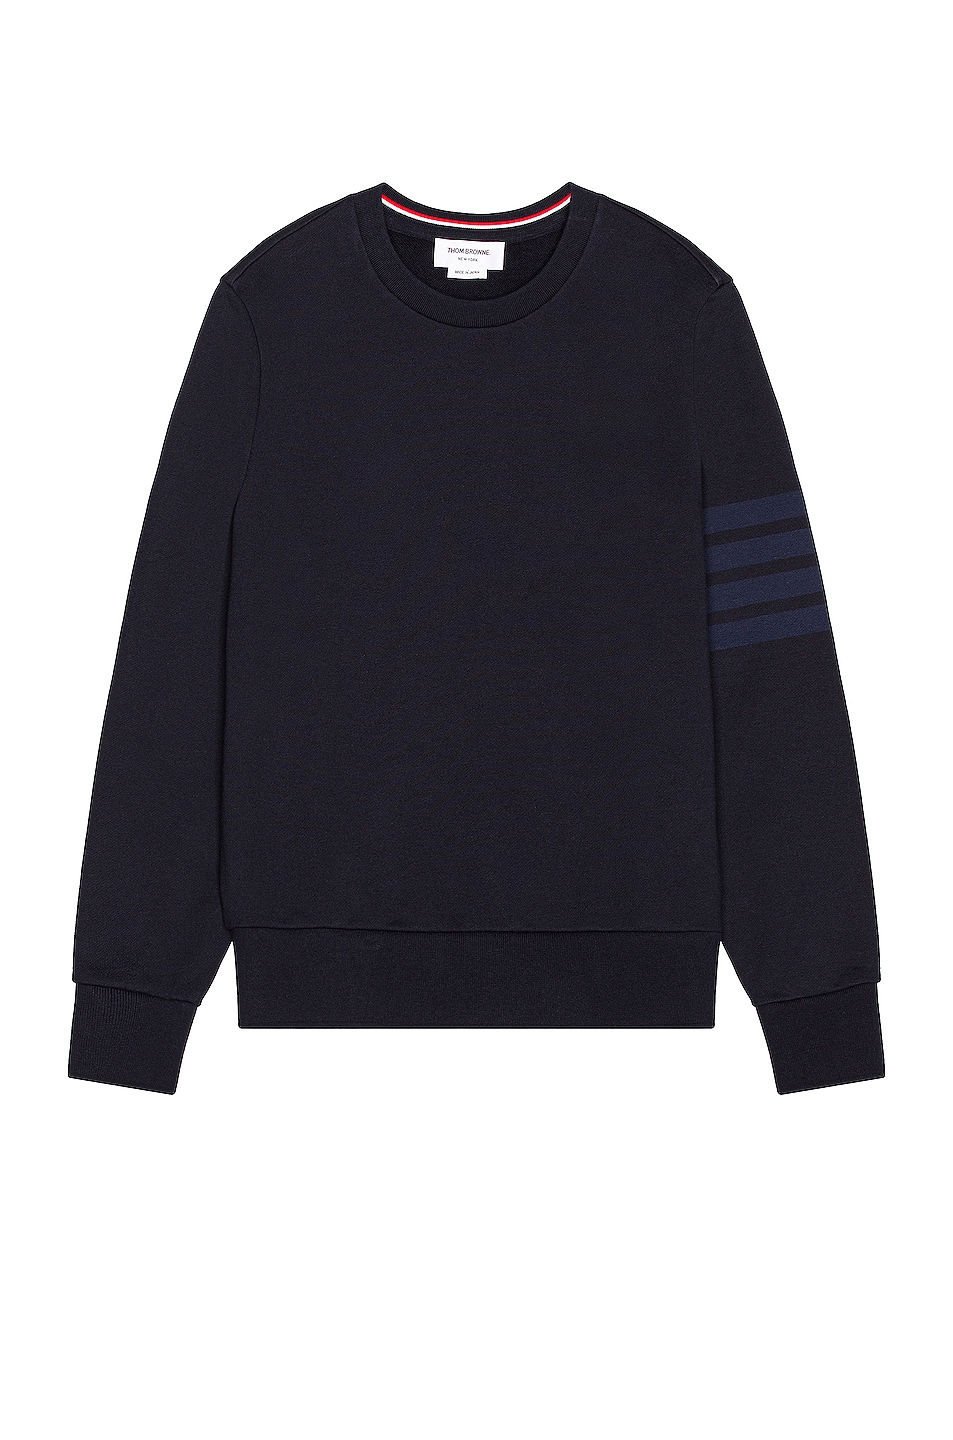 Image 1 of Thom Browne 4 Bar Relaxed Crewneck Sweatshirt in Navy